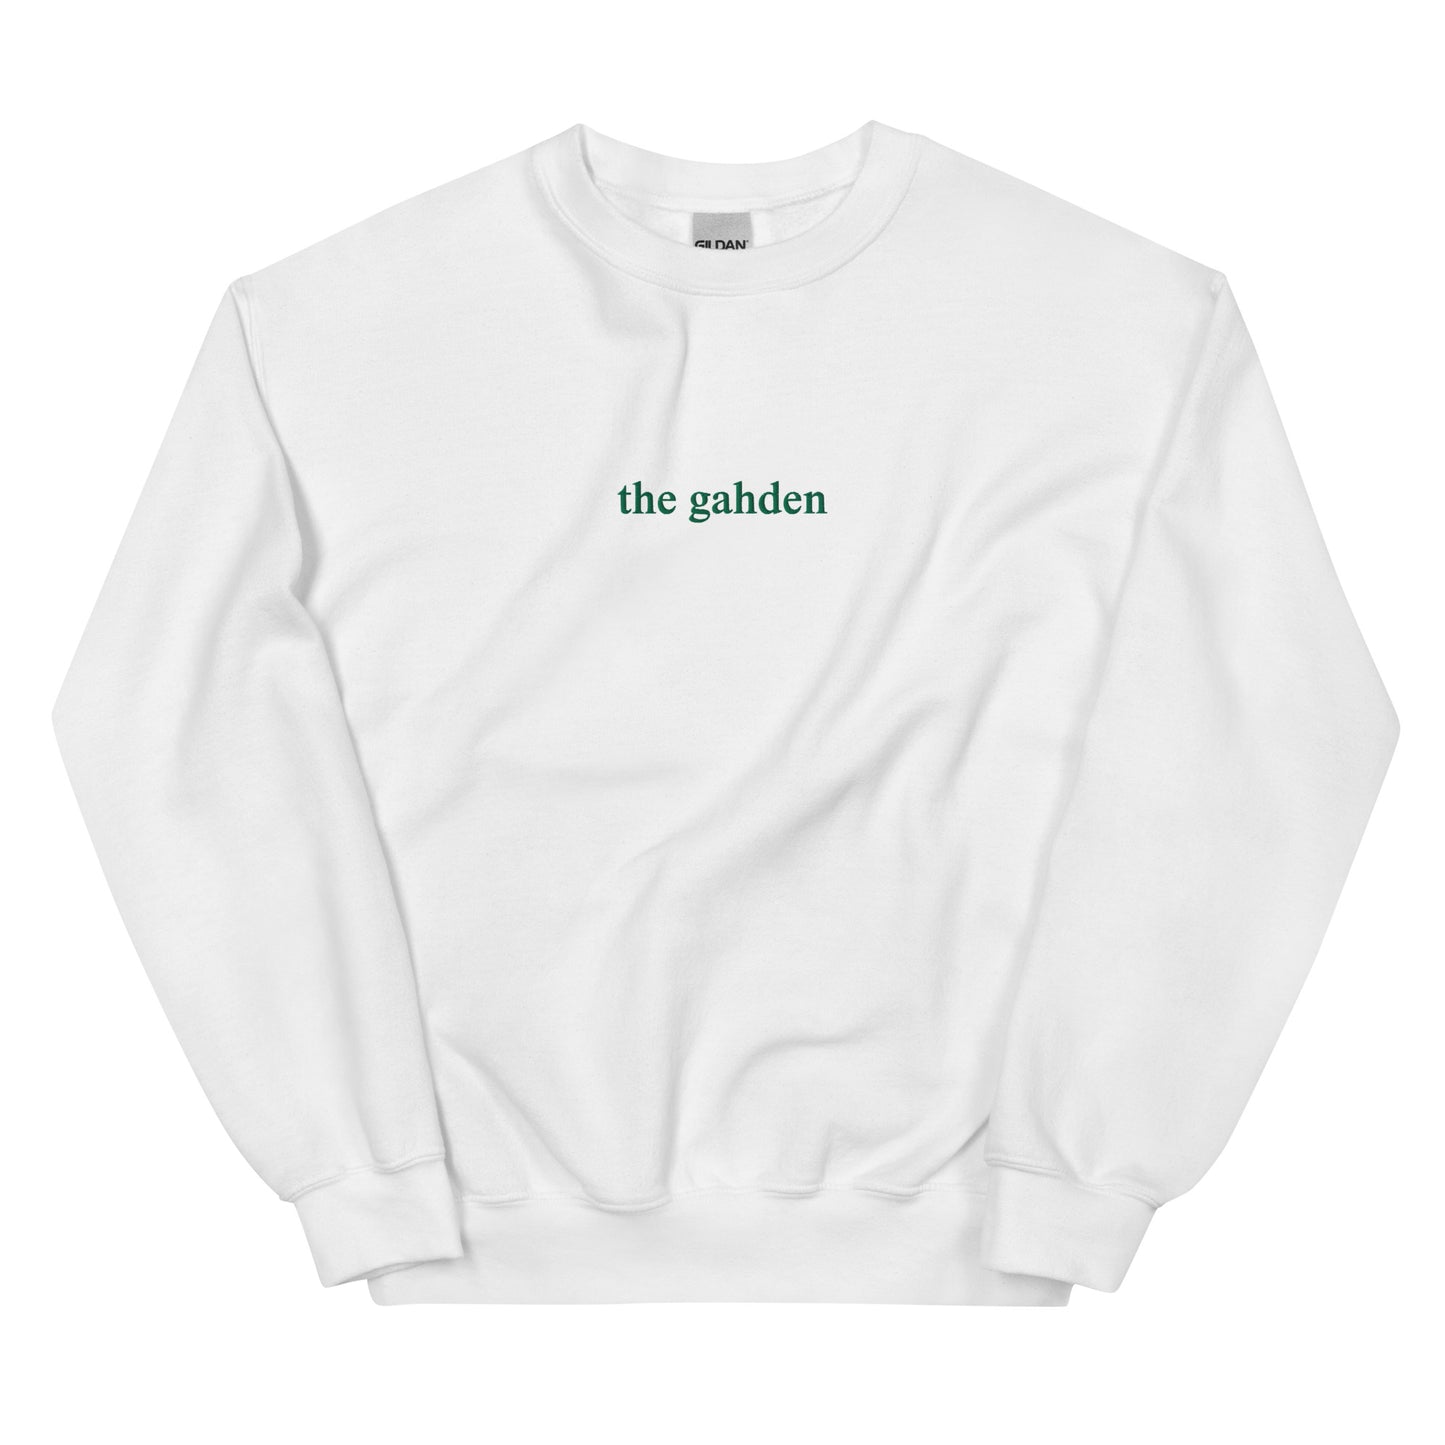 white crewneck that says "the gahden" in green lettering